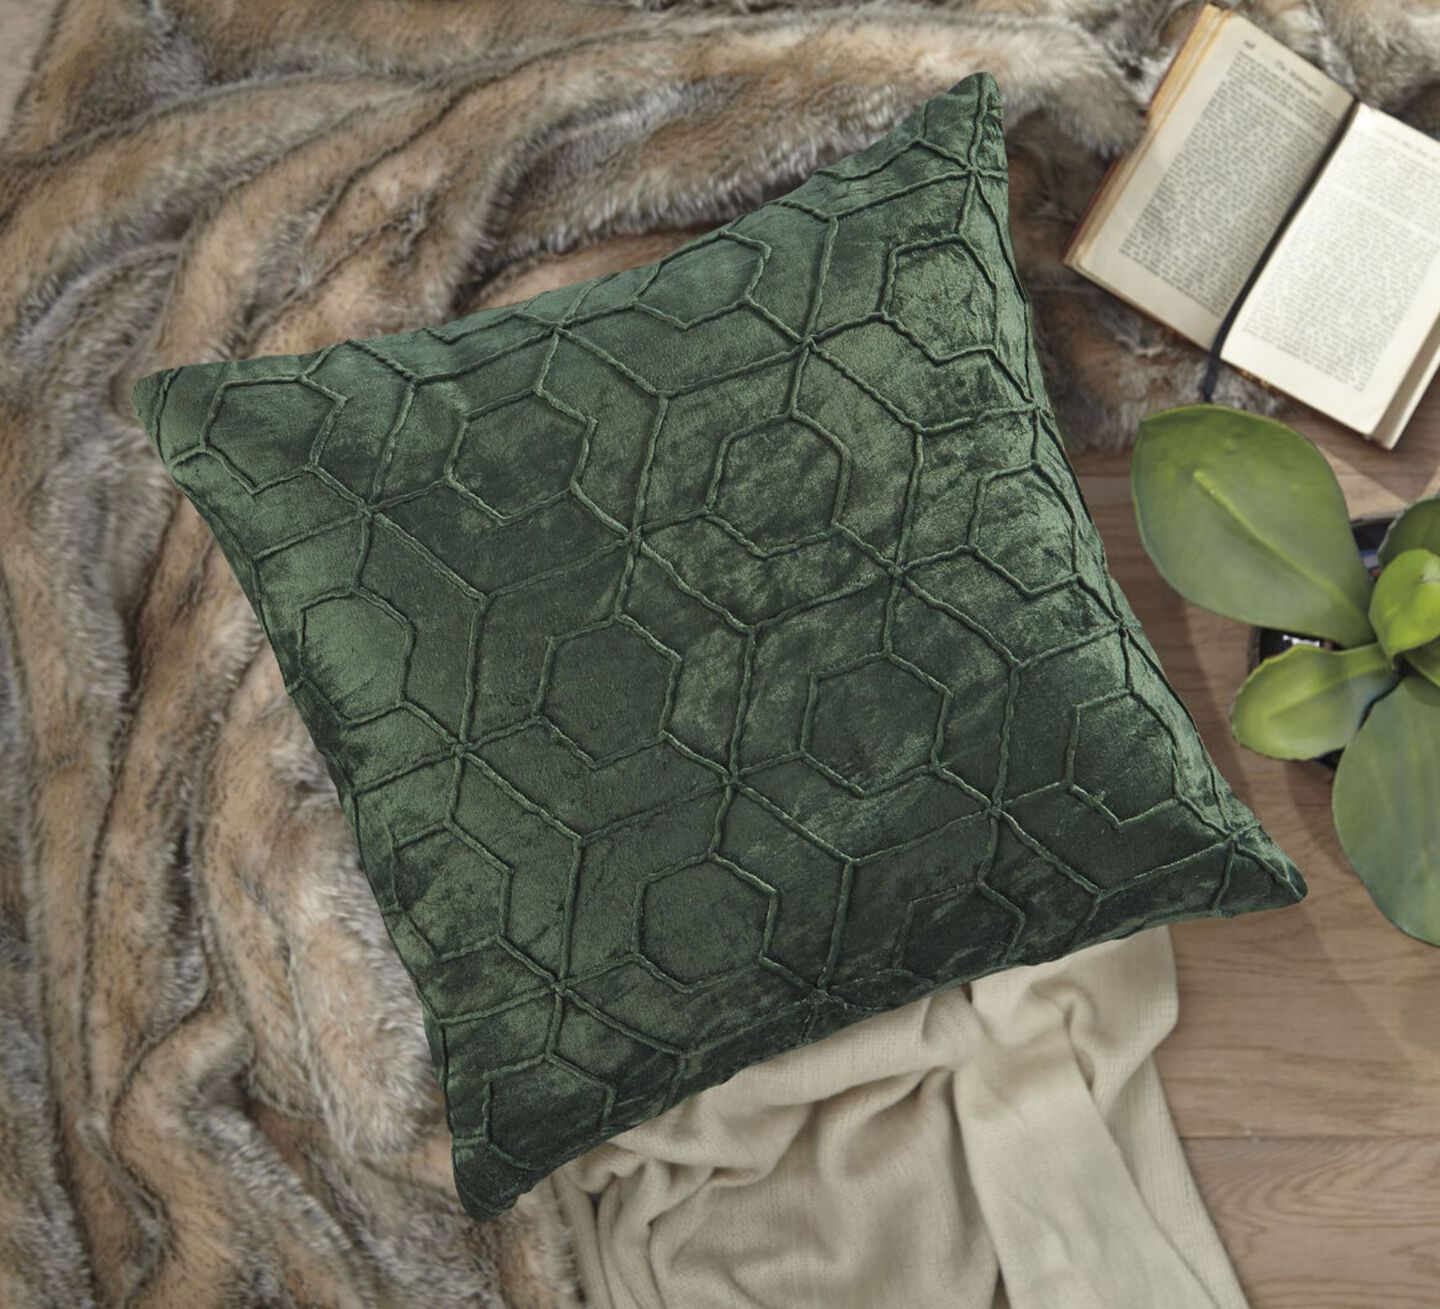 Green textured pillow on top of a brown blanket next to a plant and book